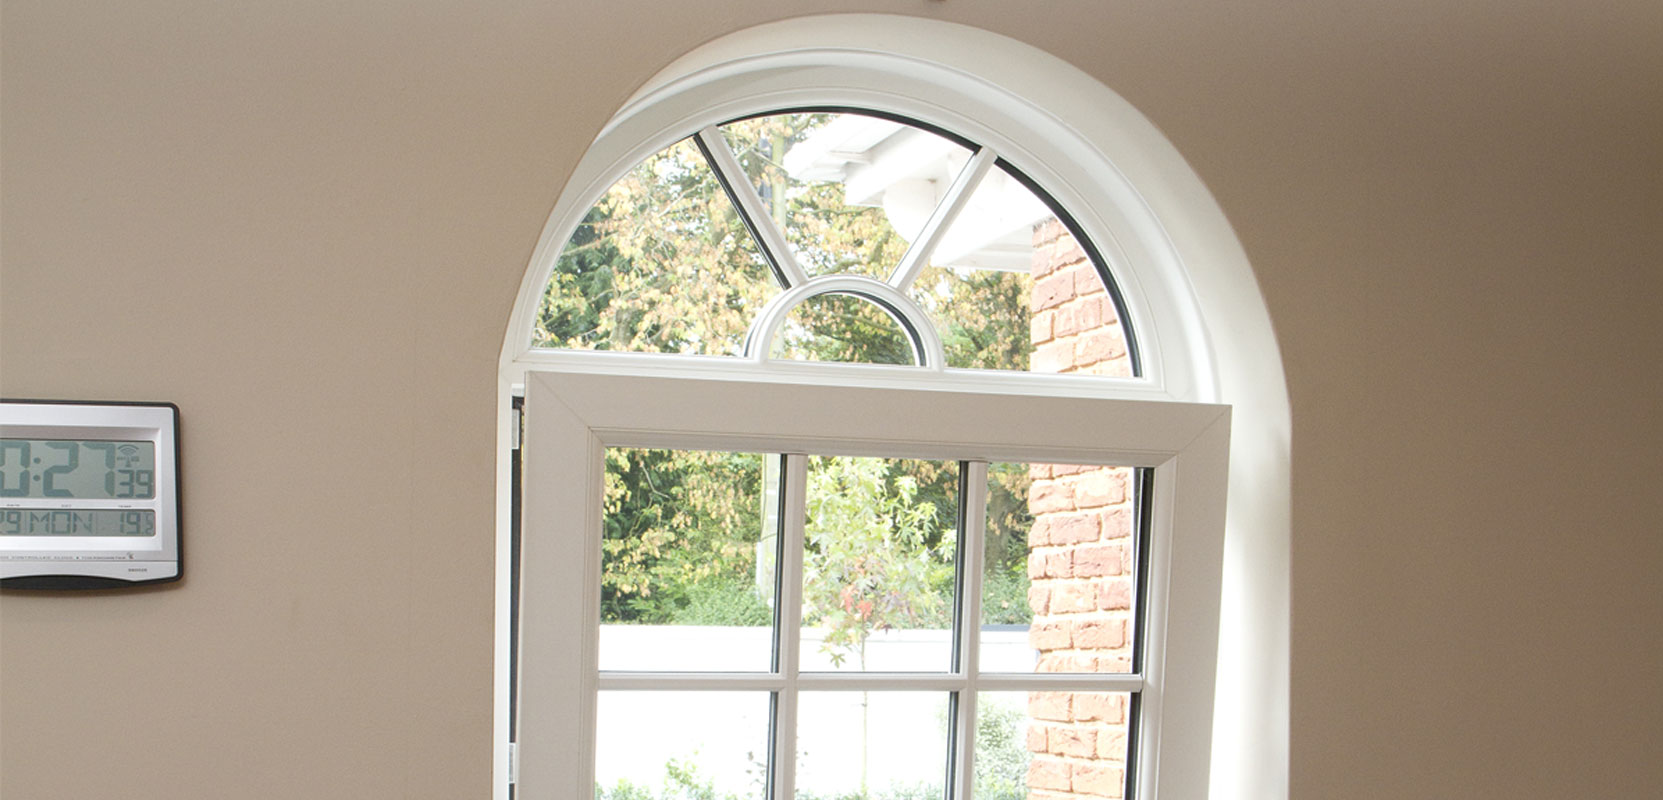 Photo of a tilt and turn window